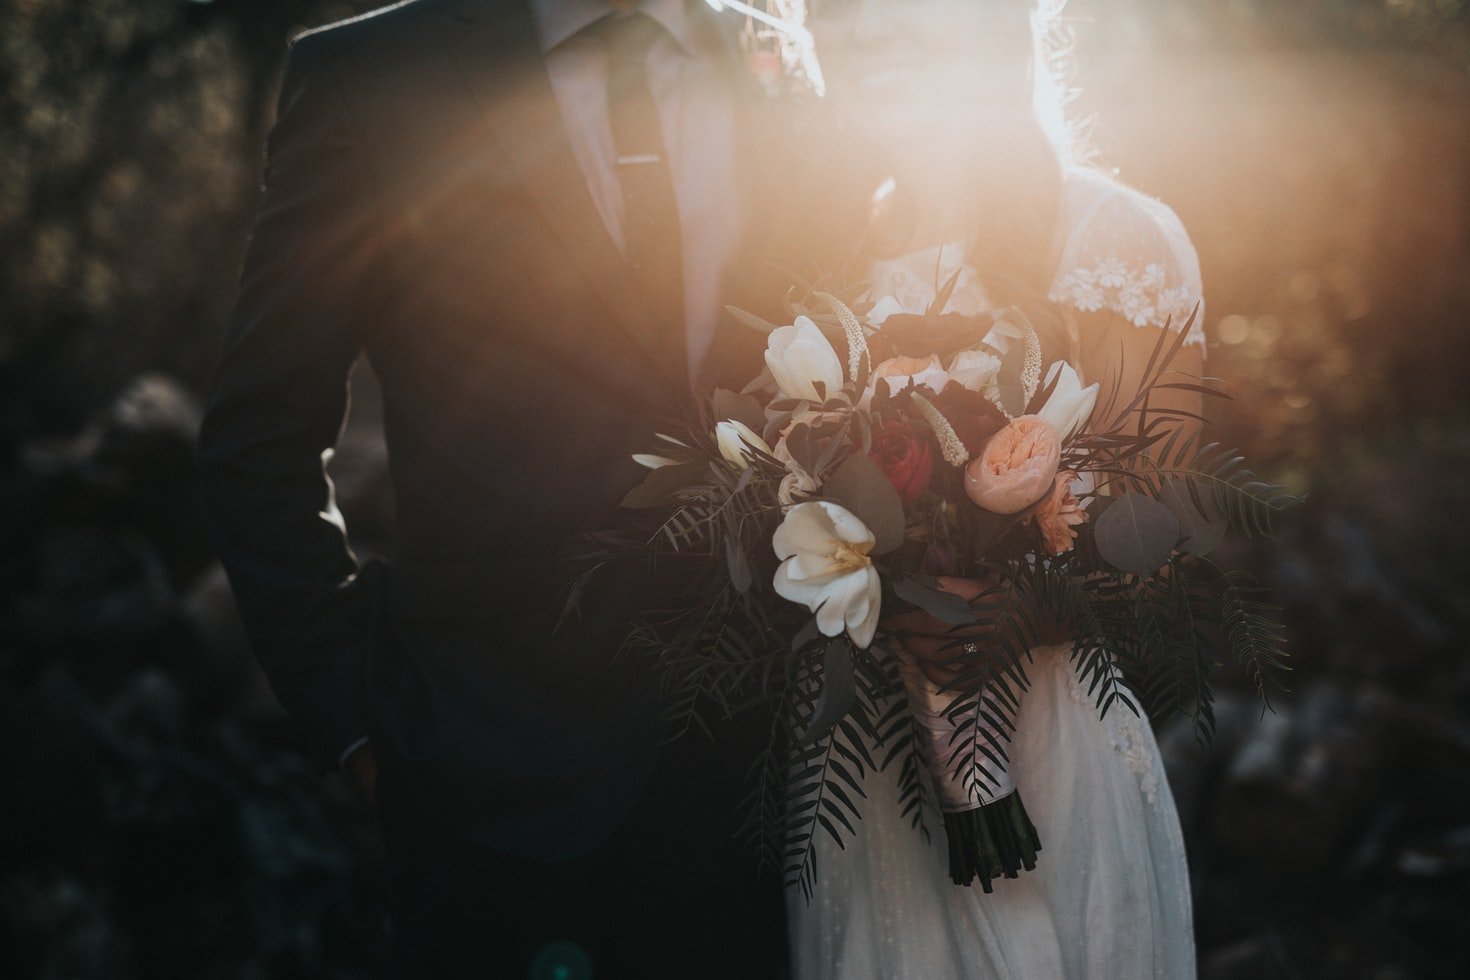 When she married, Jenna's dream was to have a big family | Source: Unsplash